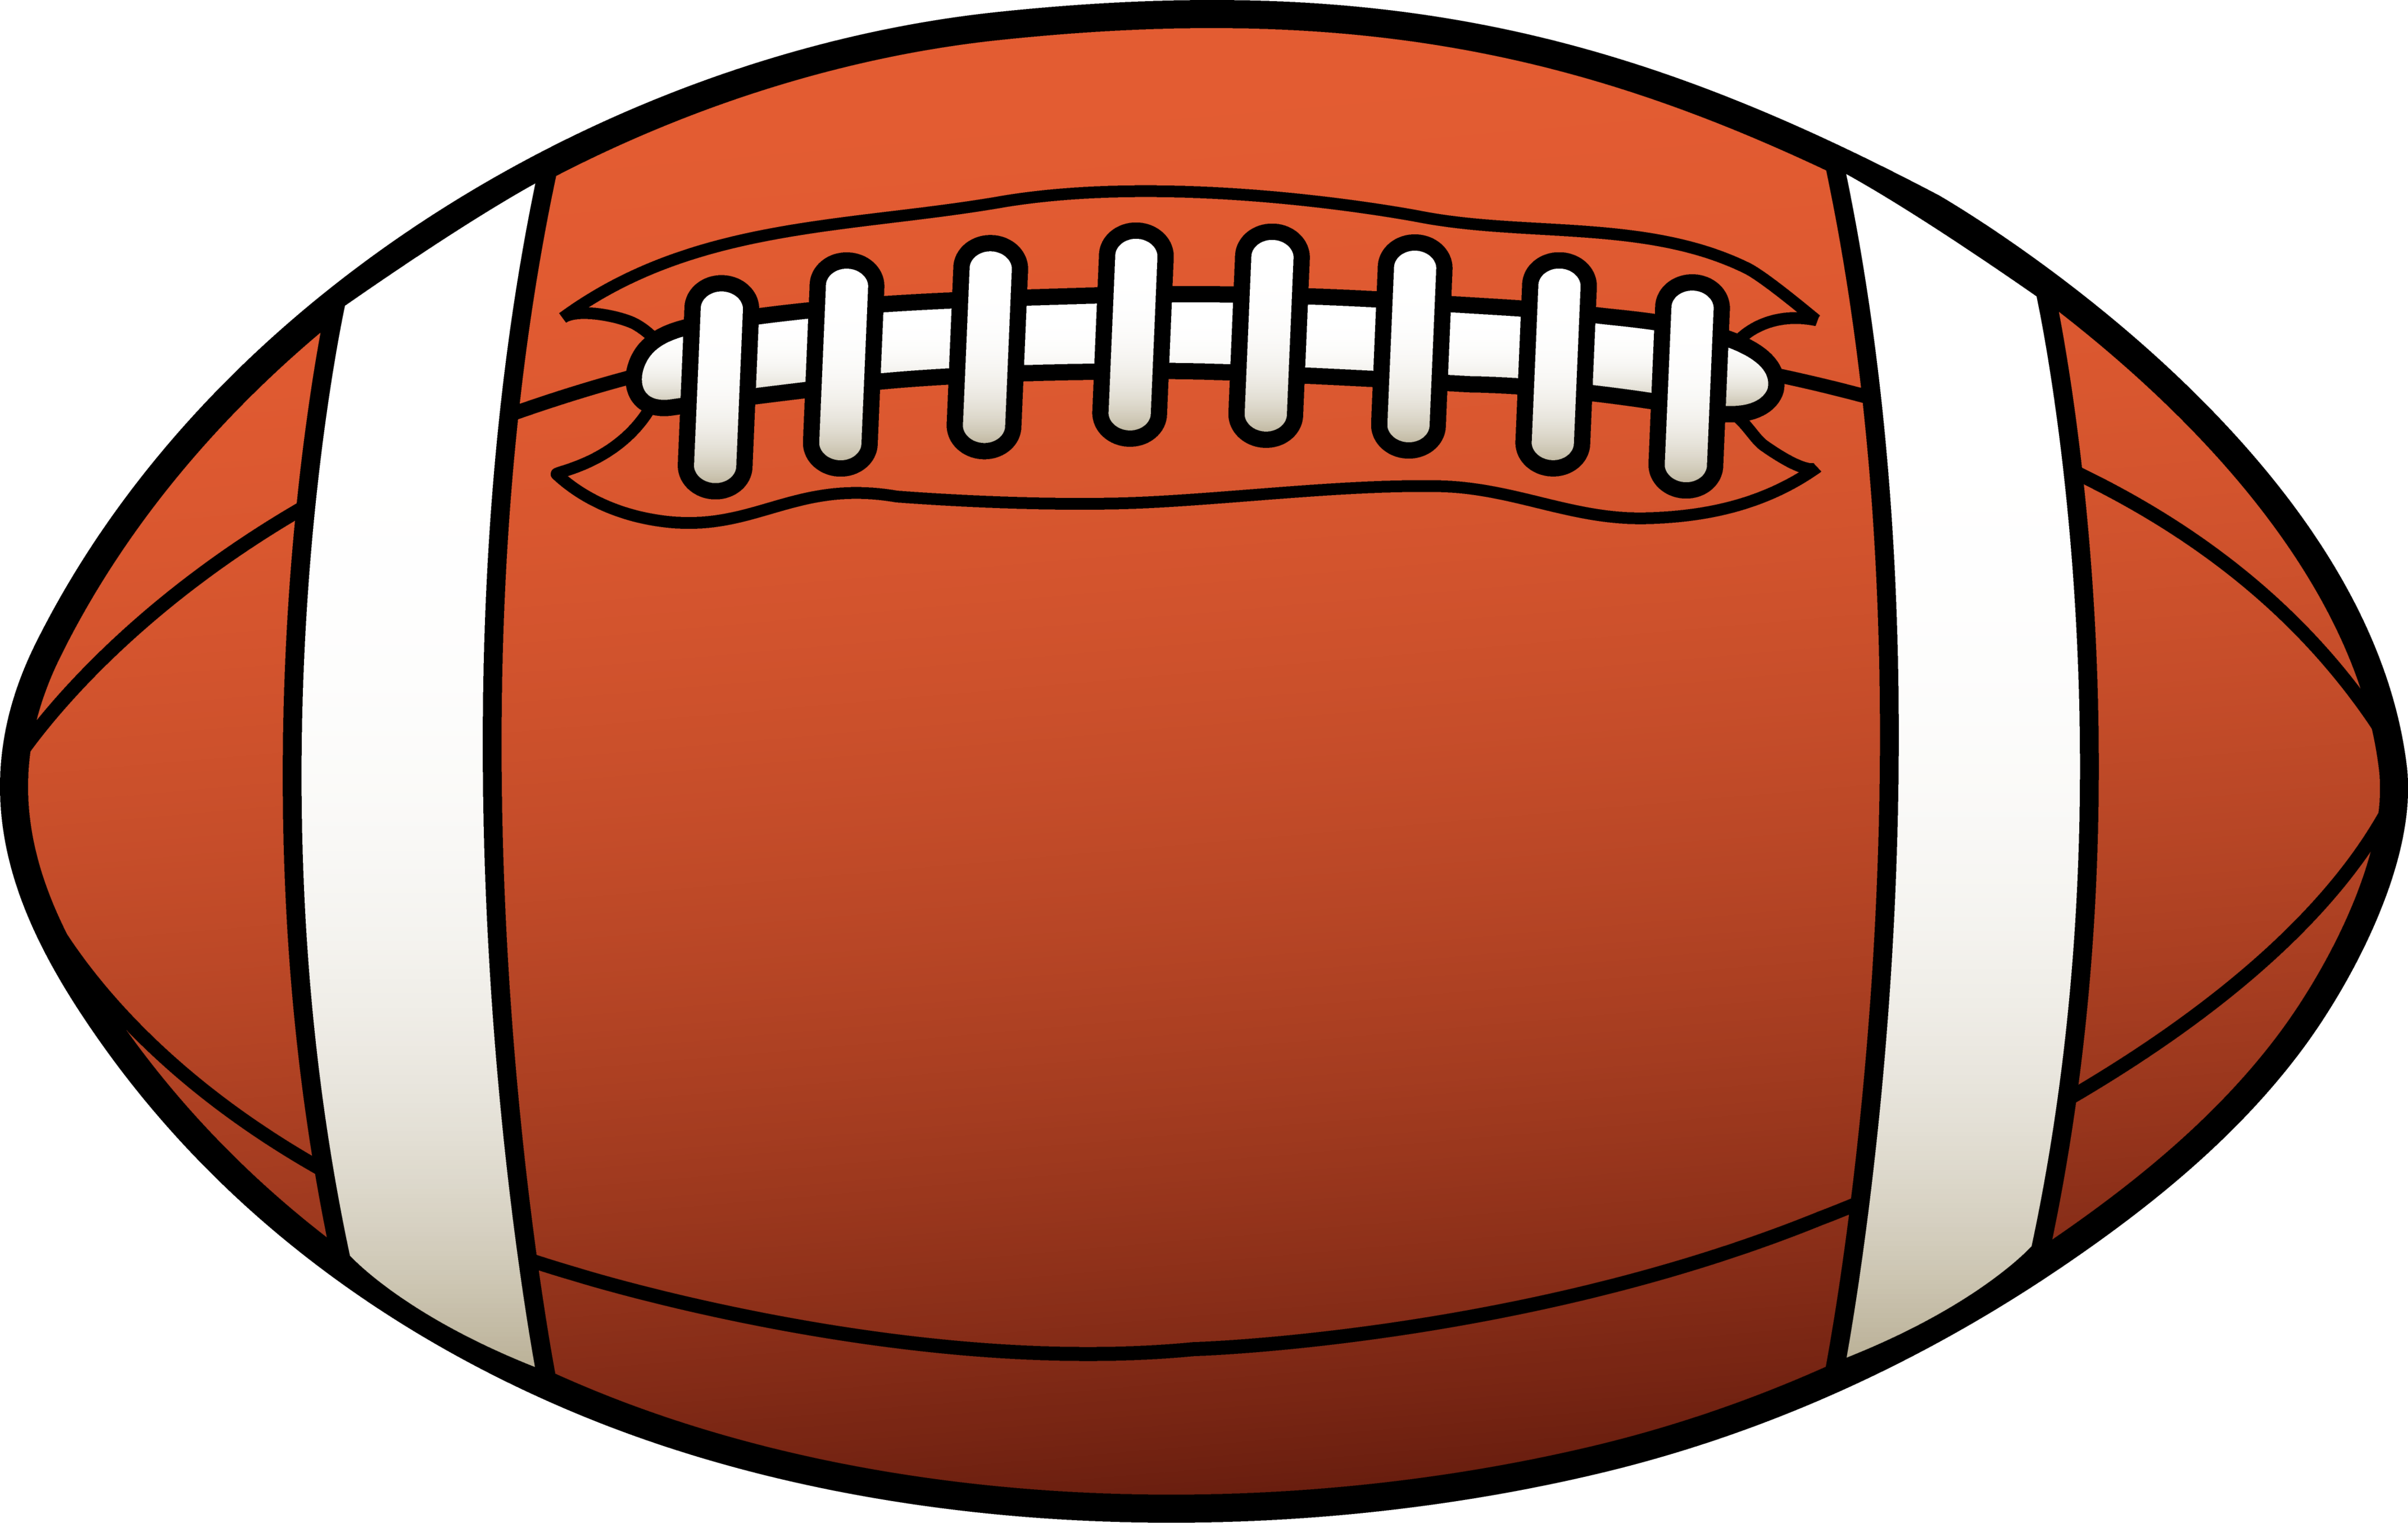 Football laces free football clip art images clipart to use resource